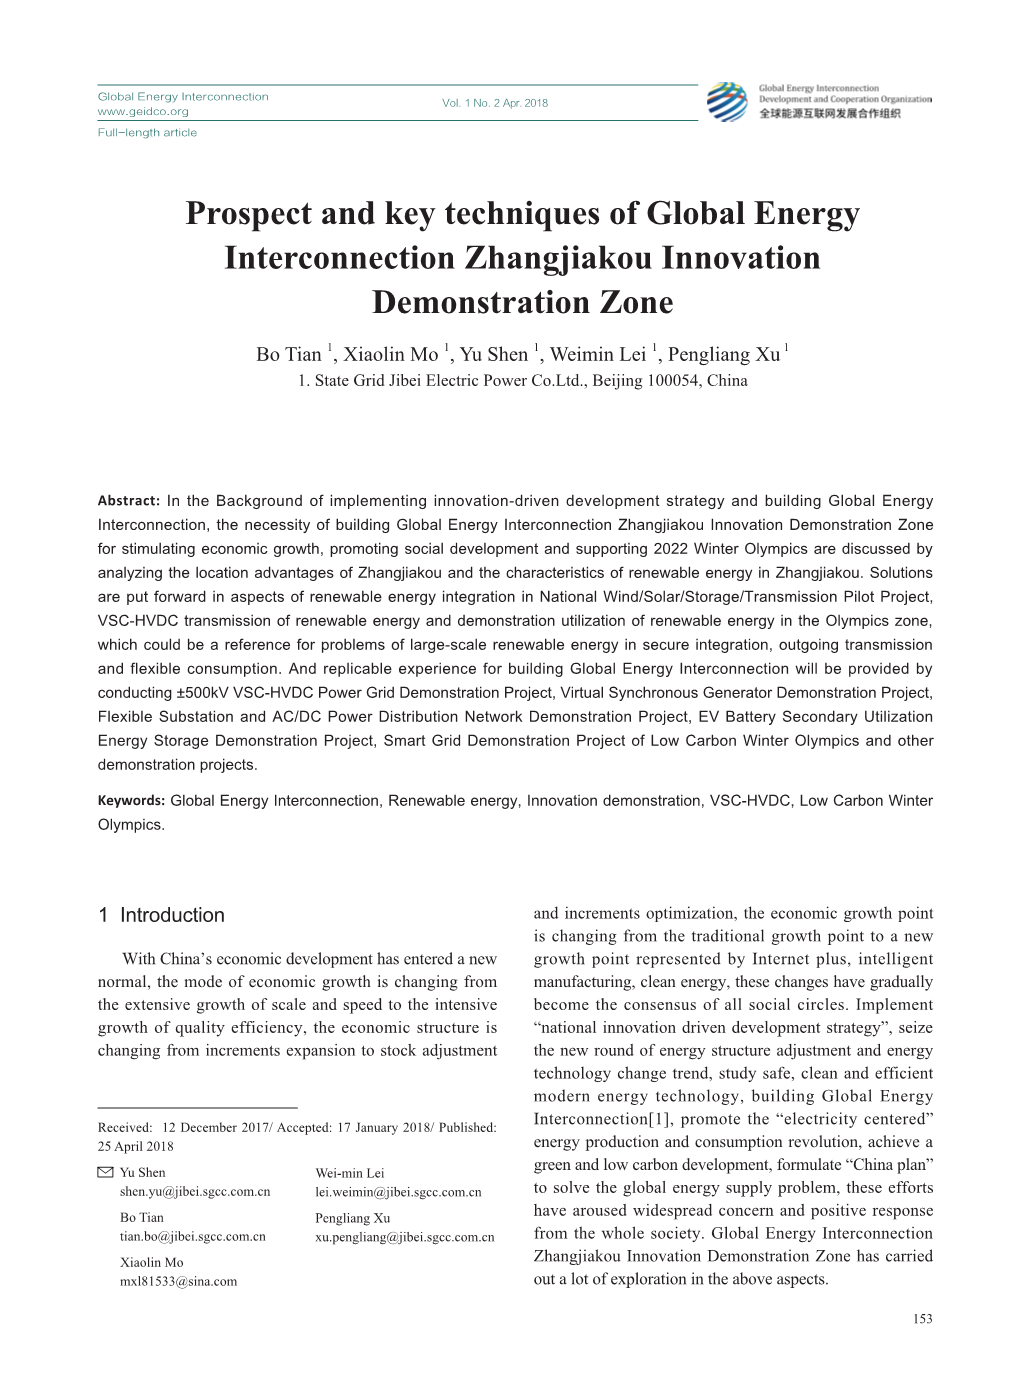 Prospect and Key Techniques of Global Energy Interconnection Zhangjiakou Innovation Demonstration Zone